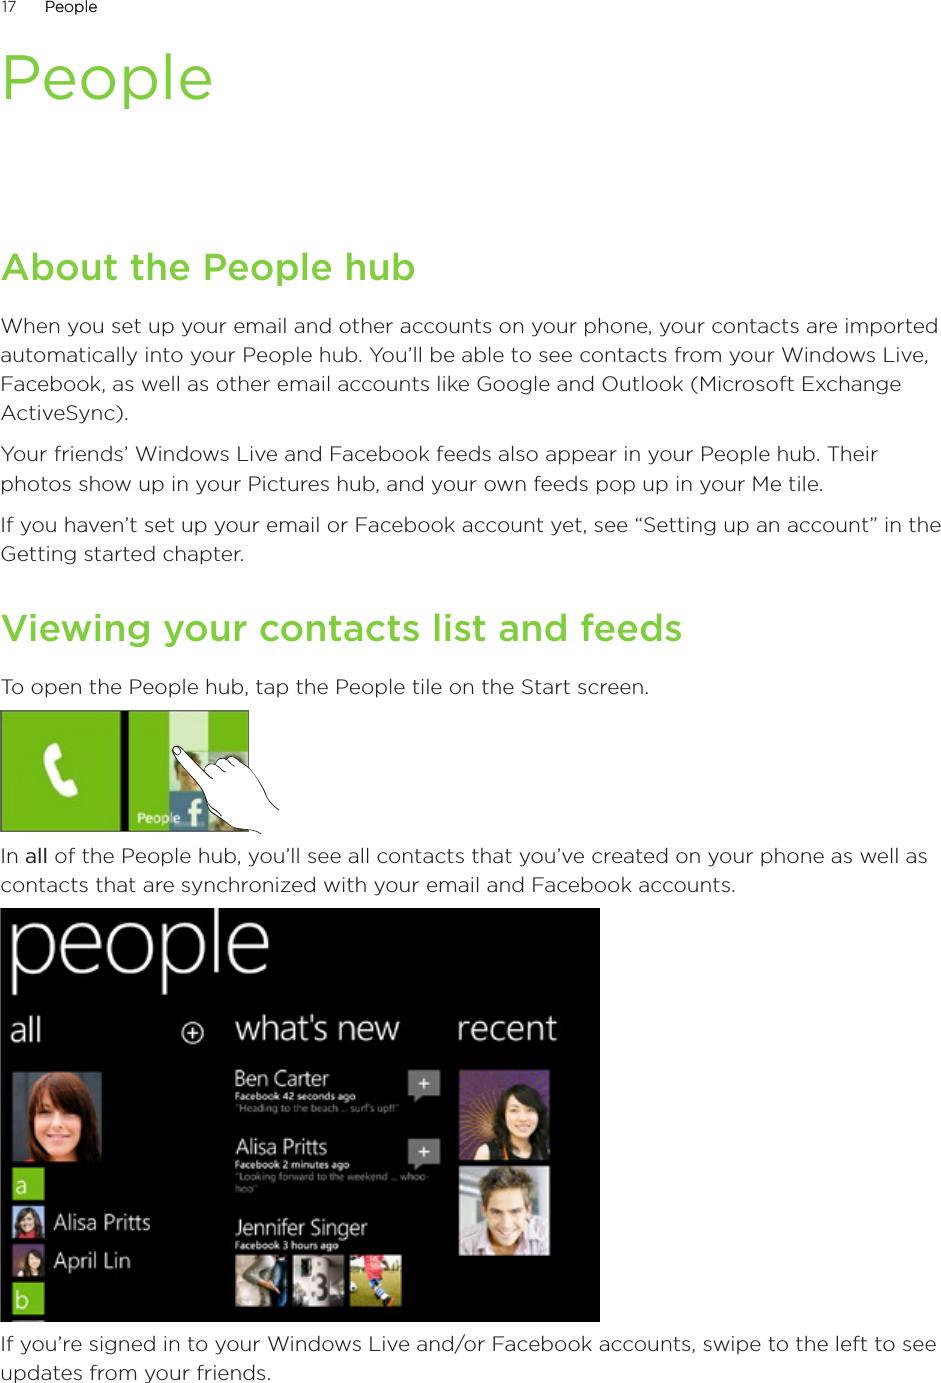 17      PeoplePeople      PeopleAbout the People hubWhen you set up your email and other accounts on your phone, your contacts are imported automatically into your People hub. You’ll be able to see contacts from your Windows Live, Facebook, as well as other email accounts like Google and Outlook (Microsoft Exchange ActiveSync).Your friends’ Windows Live and Facebook feeds also appear in your People hub. Their photos show up in your Pictures hub, and your own feeds pop up in your Me tile.If you haven’t set up your email or Facebook account yet, see “Setting up an account” in the Getting started chapter.Viewing your contacts list and feedsTo open the People hub, tap the People tile on the Start screen.In all of the People hub, you’ll see all contacts that you’ve created on your phone as well as contacts that are synchronized with your email and Facebook accounts.If you’re signed in to your Windows Live and/or Facebook accounts, swipe to the left to see updates from your friends.